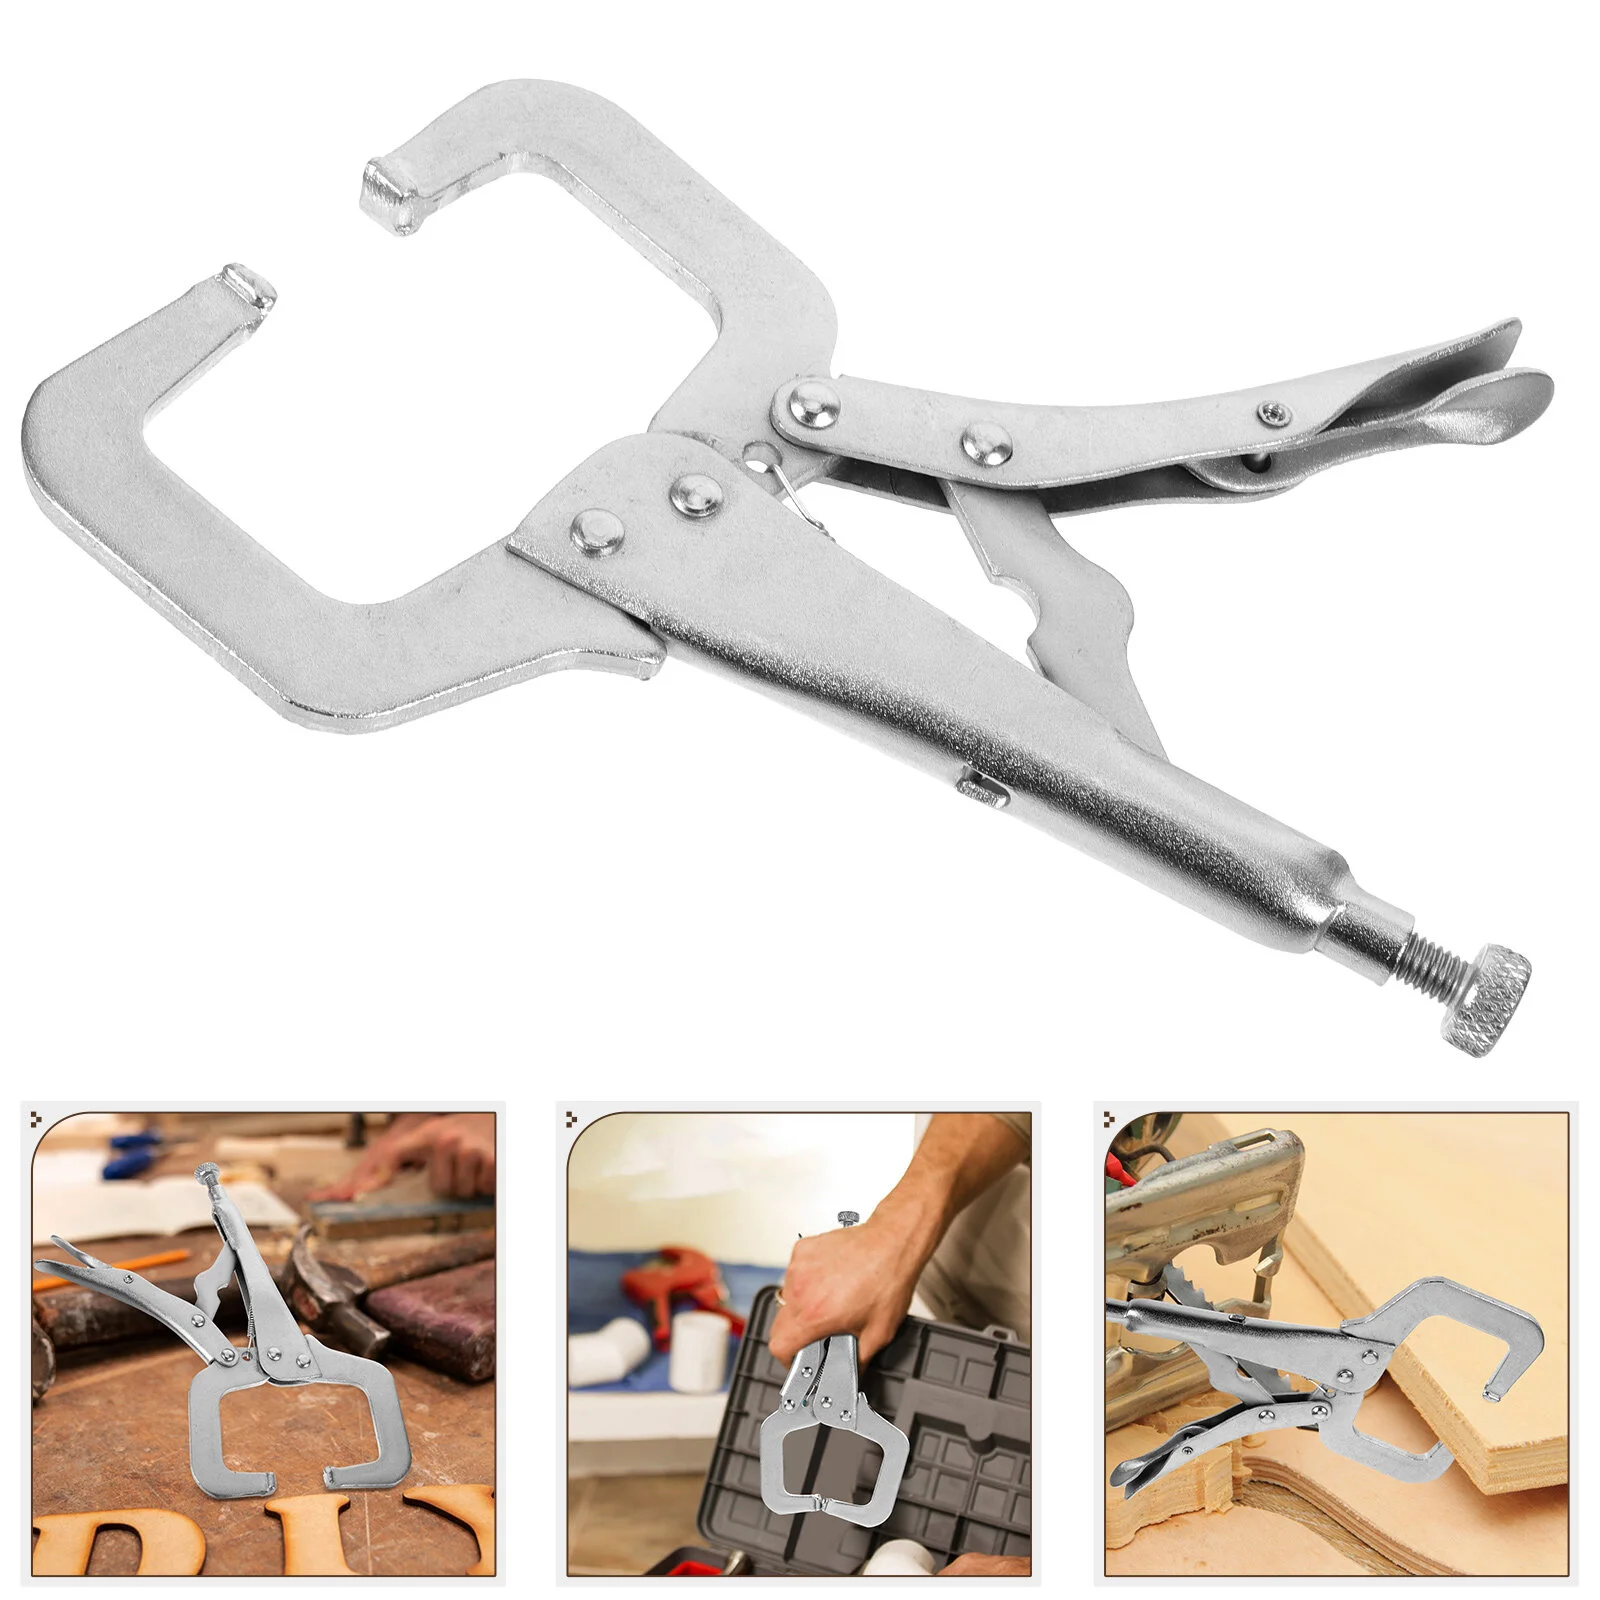 

6 Inch Heavy Duty Locking C-Clamp Face Clamp Steel Locking C-Pliers Vise Grips Locking Plier Wrench Welding Steel Wood Clamp